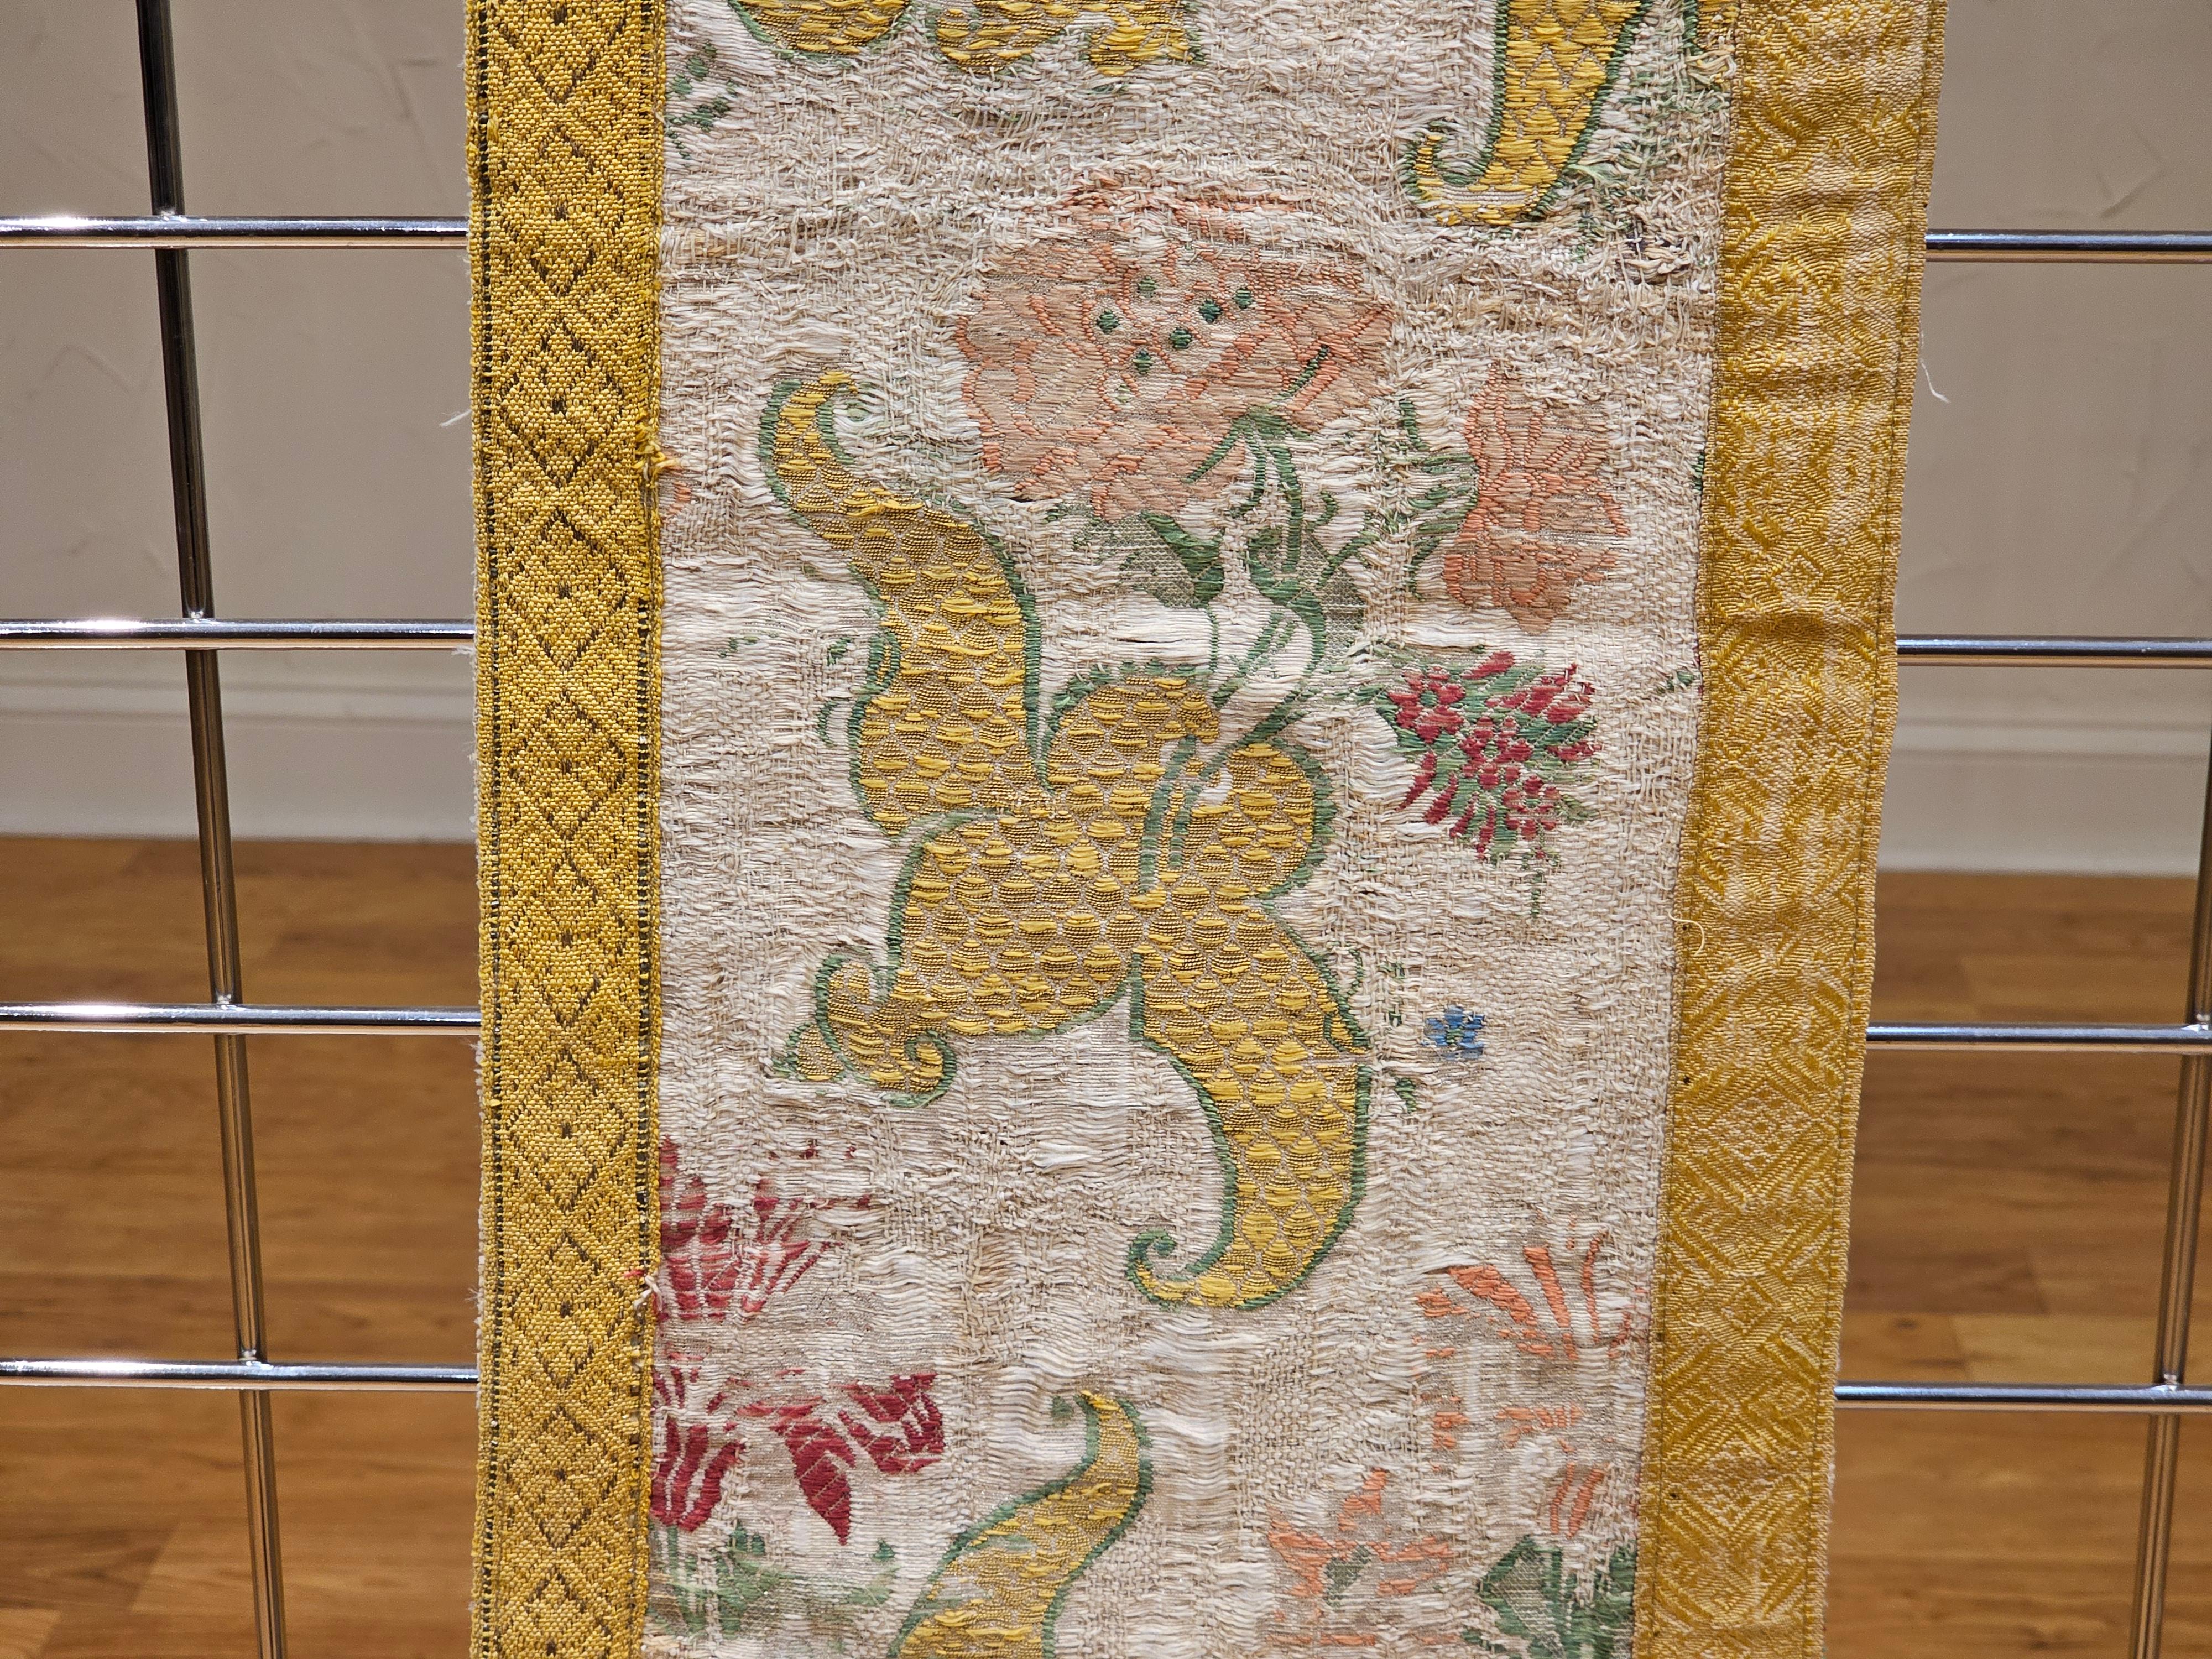 18th Century European Hand Embroidered Silk and Gilt Threads Textile Panel In Good Condition For Sale In Barrington, IL